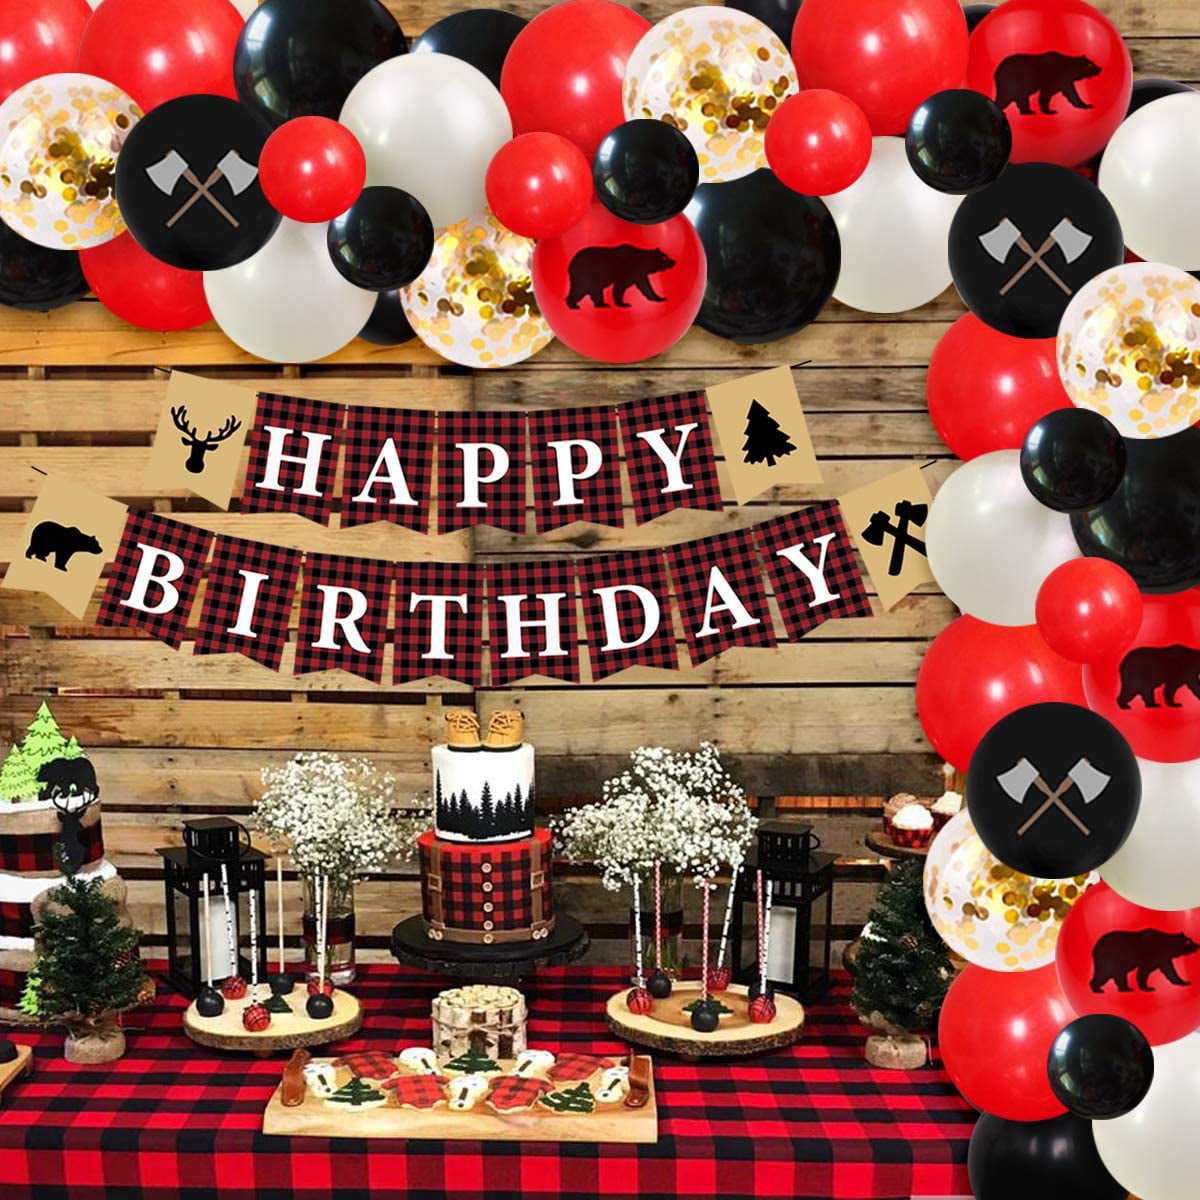 Birthday Baby Shower Christmas Party decorations Deer,Trees & Buffalo Plaid Jumpsuits 100 Pieces LumberJack Woodland Confetti 